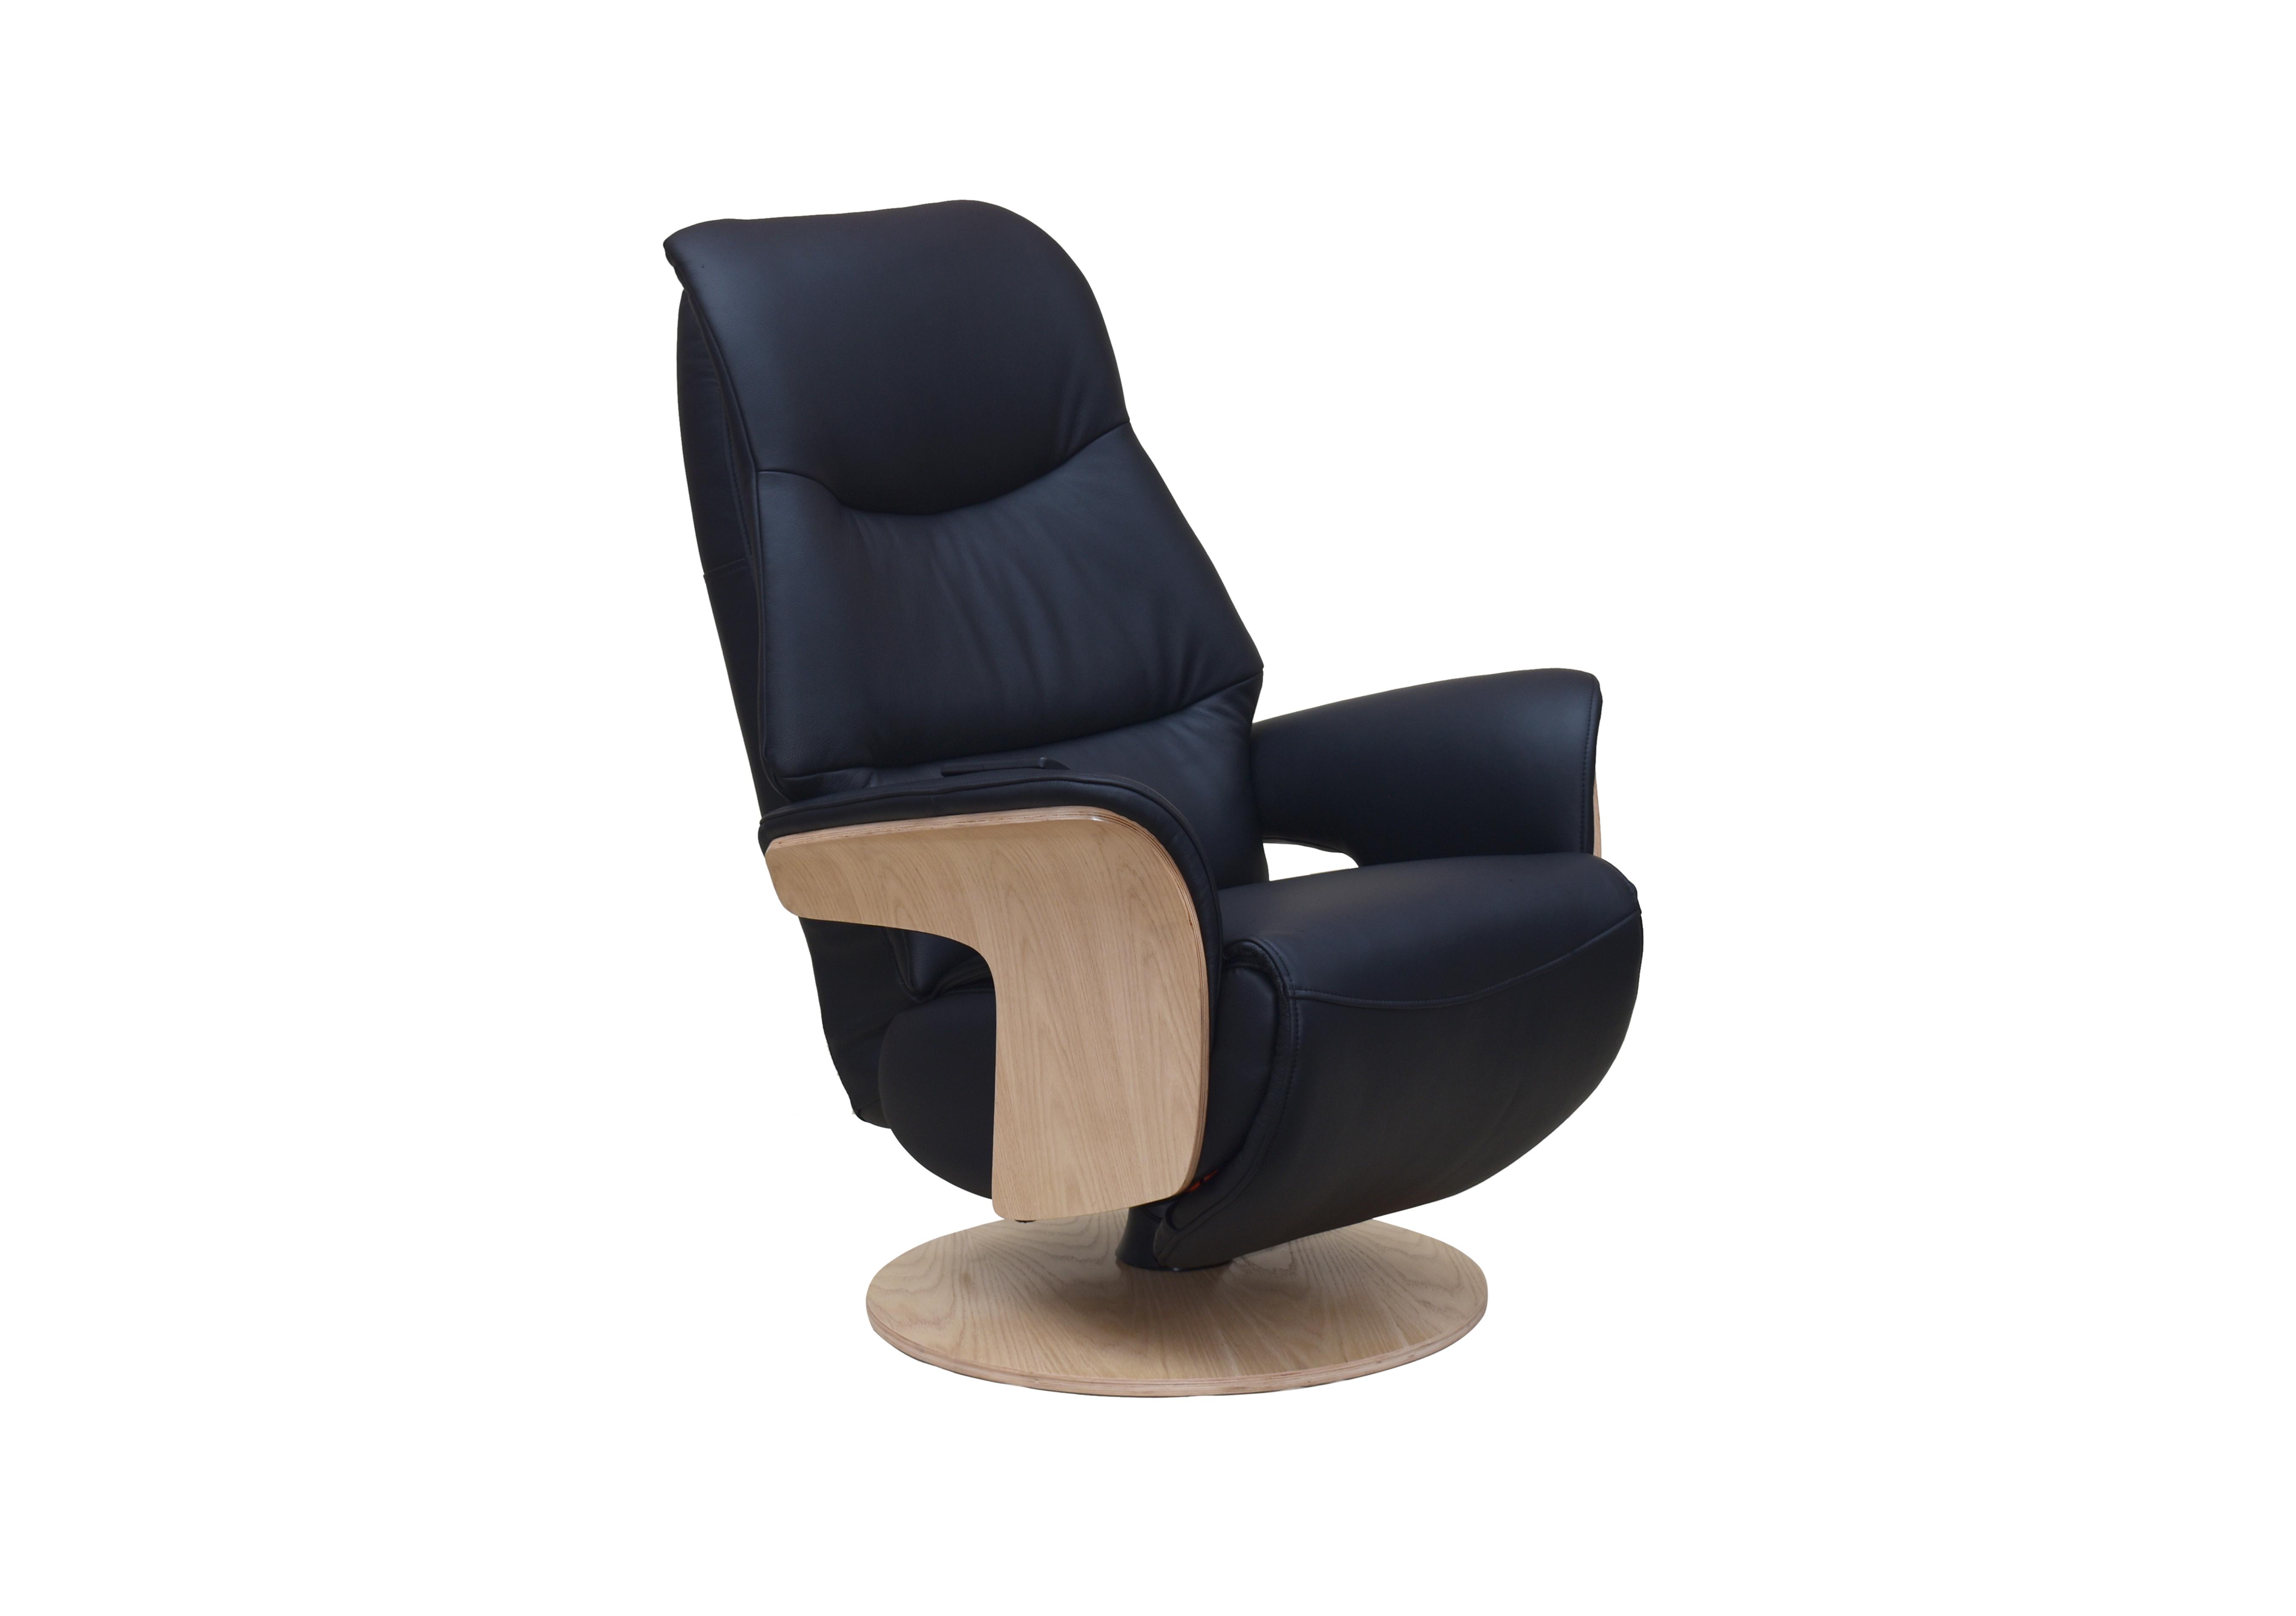 Olaf Leather Look Swivel Recliner Chair in Black on Furniture Village